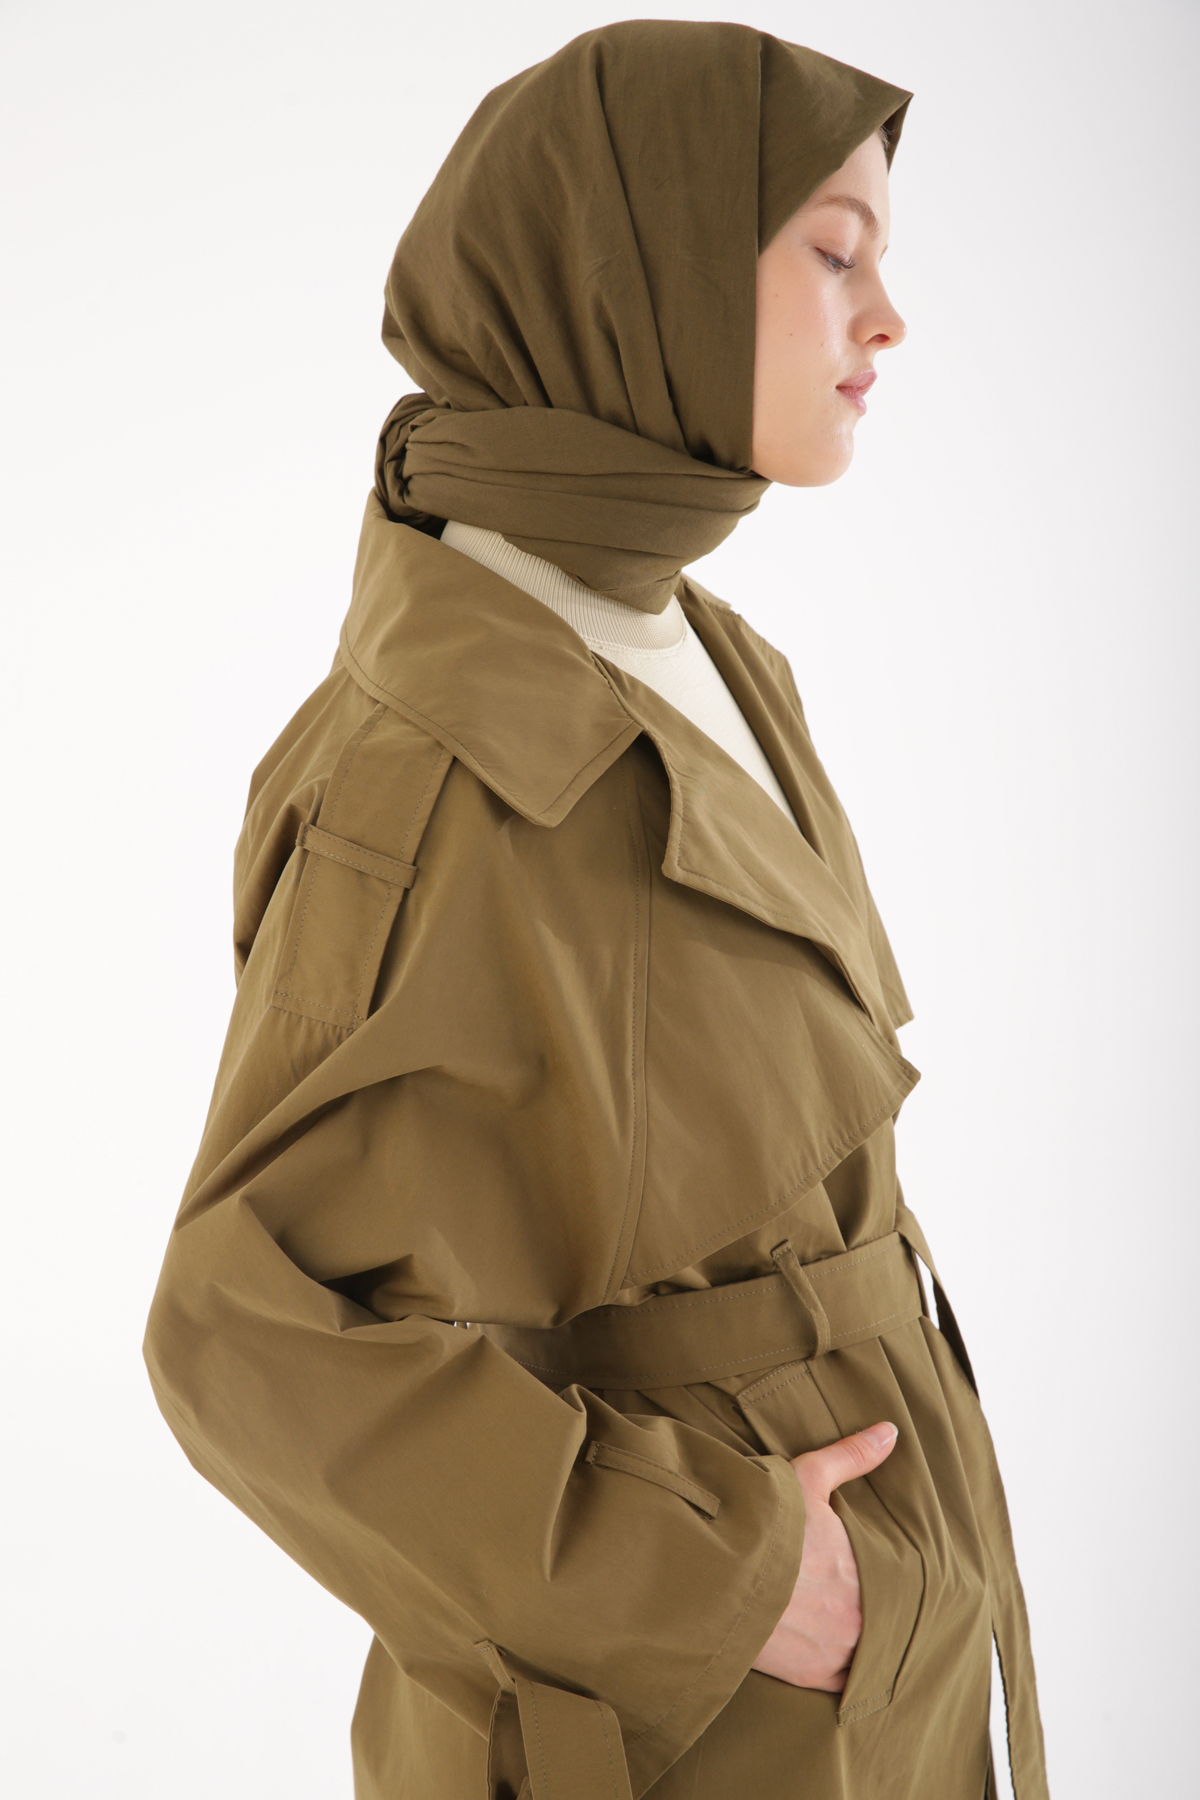 A model wears ALL11729 - Belted Snap Trench Coat - Khaki, wholesale Trenchcoat of Allday to display at Lonca